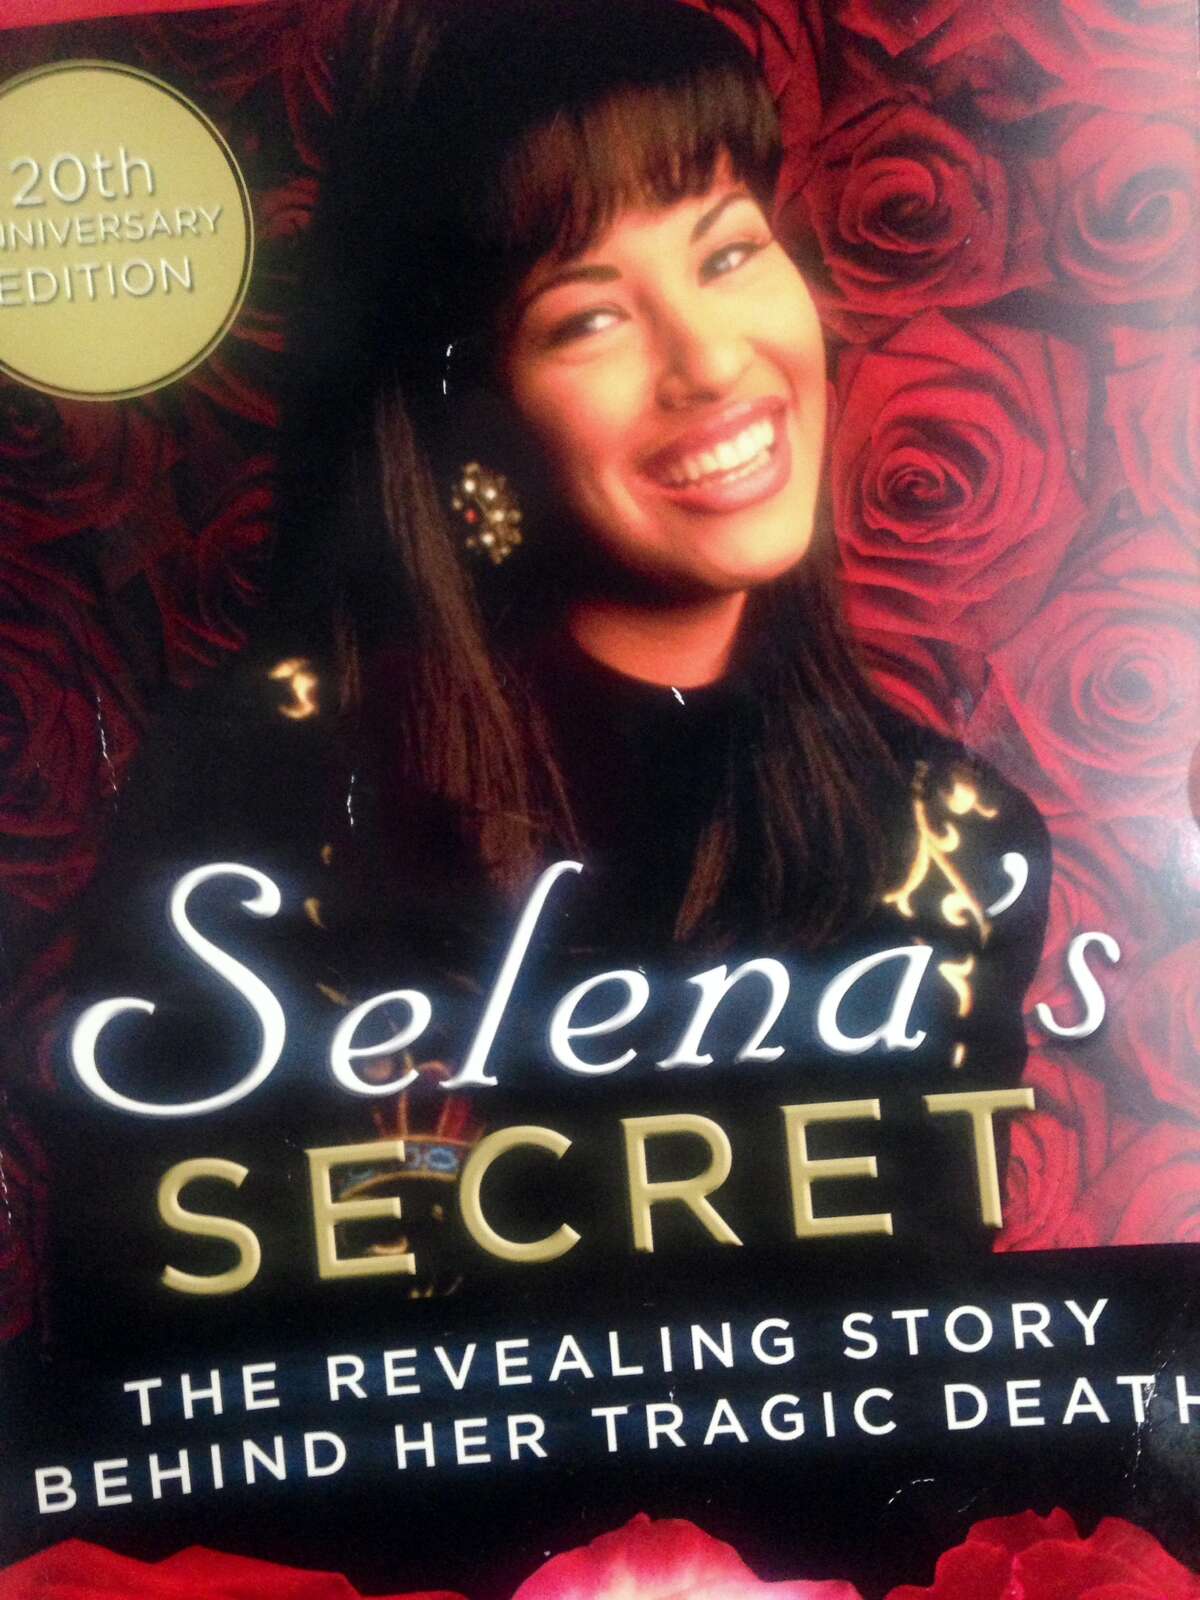 Here are 26 revelations revealed in "Selena's Secret," a book that fueled controversy due to its dive into speculations of an extramarital affair and other claims.1. At the murder scene of Days Inn room 158, a suitcase labeled with Chris Perez’s name but filled with Selena’s clothes was found. A work permit issued to Selena to work in Mexico was also discovered.